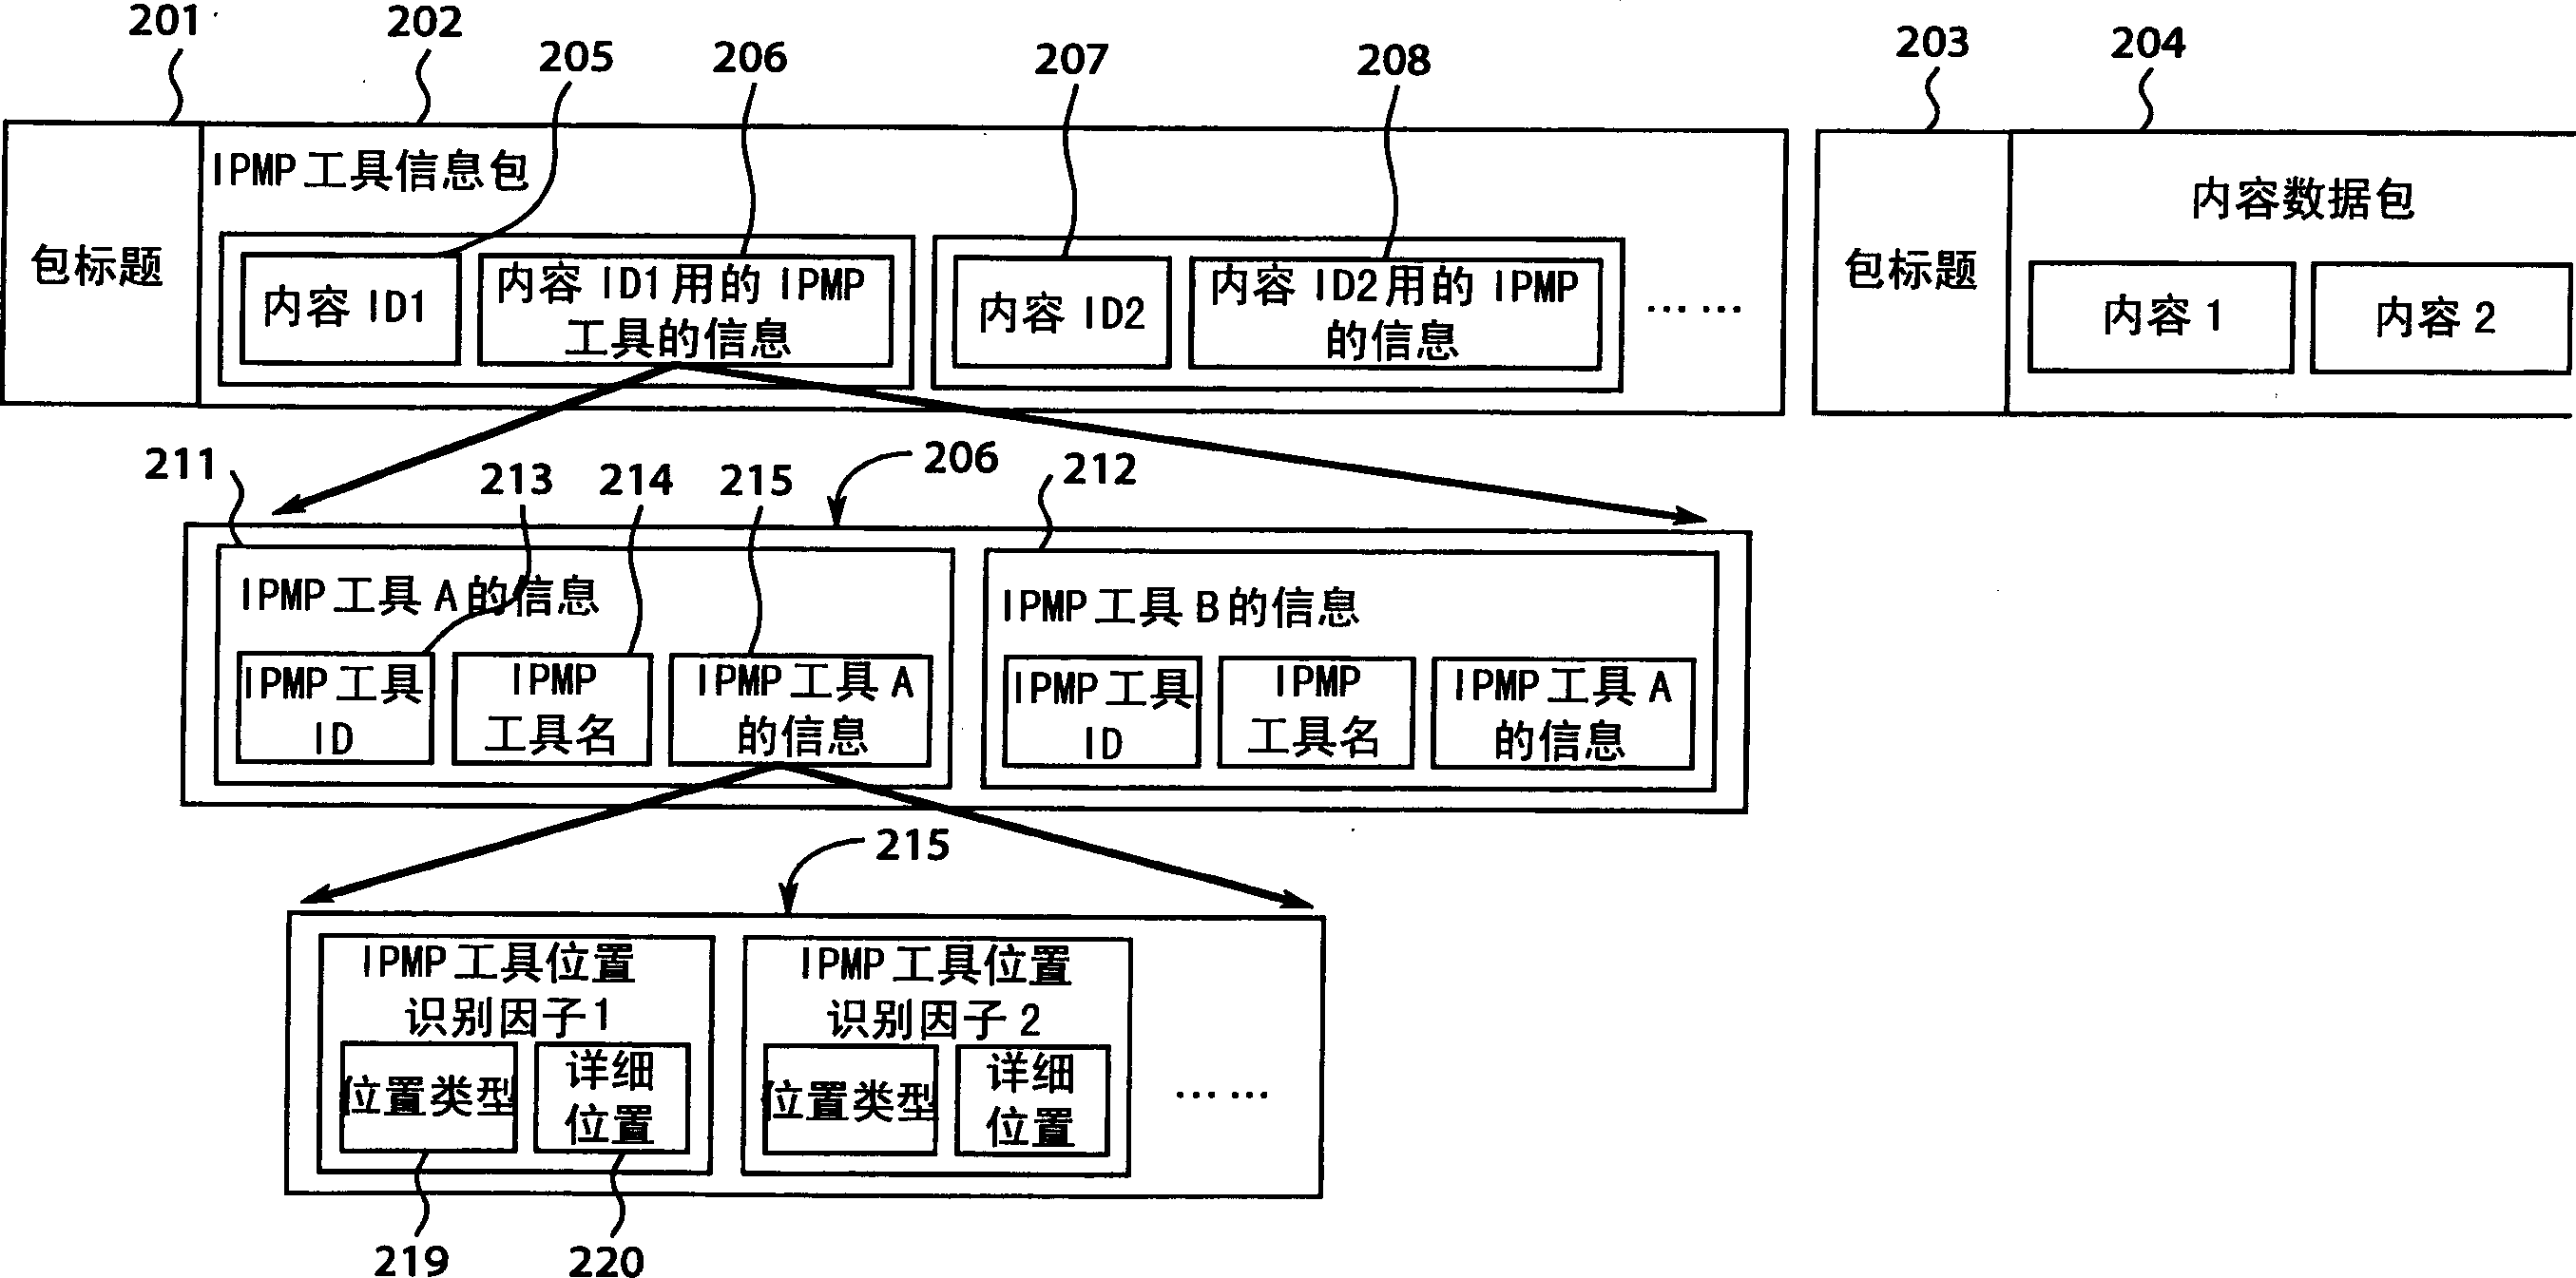 Content distribution/protecing method and apparatus